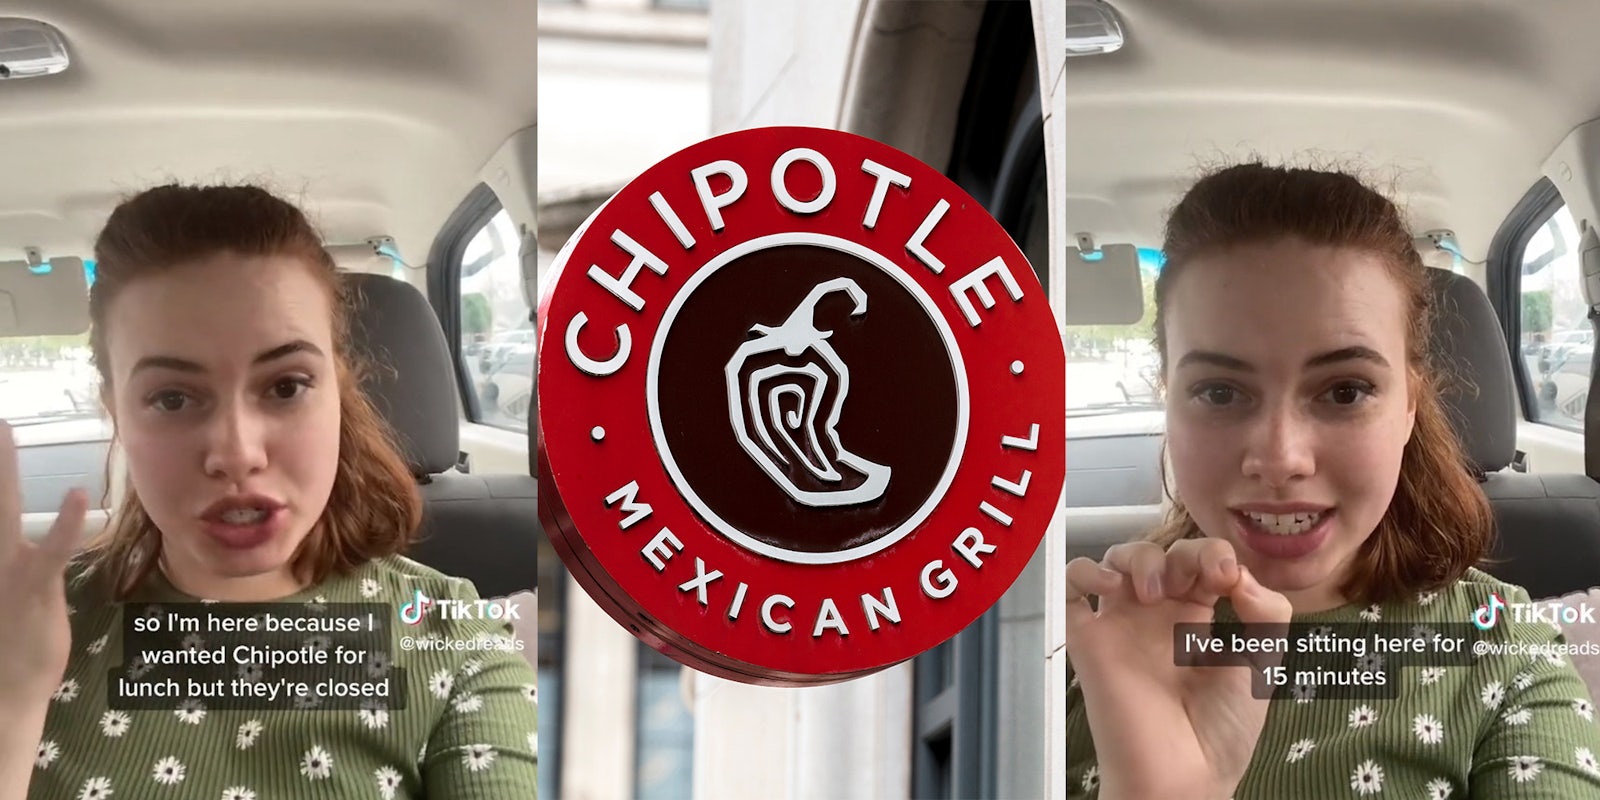 Woman says male customers kept trying to get into closed Chipotle